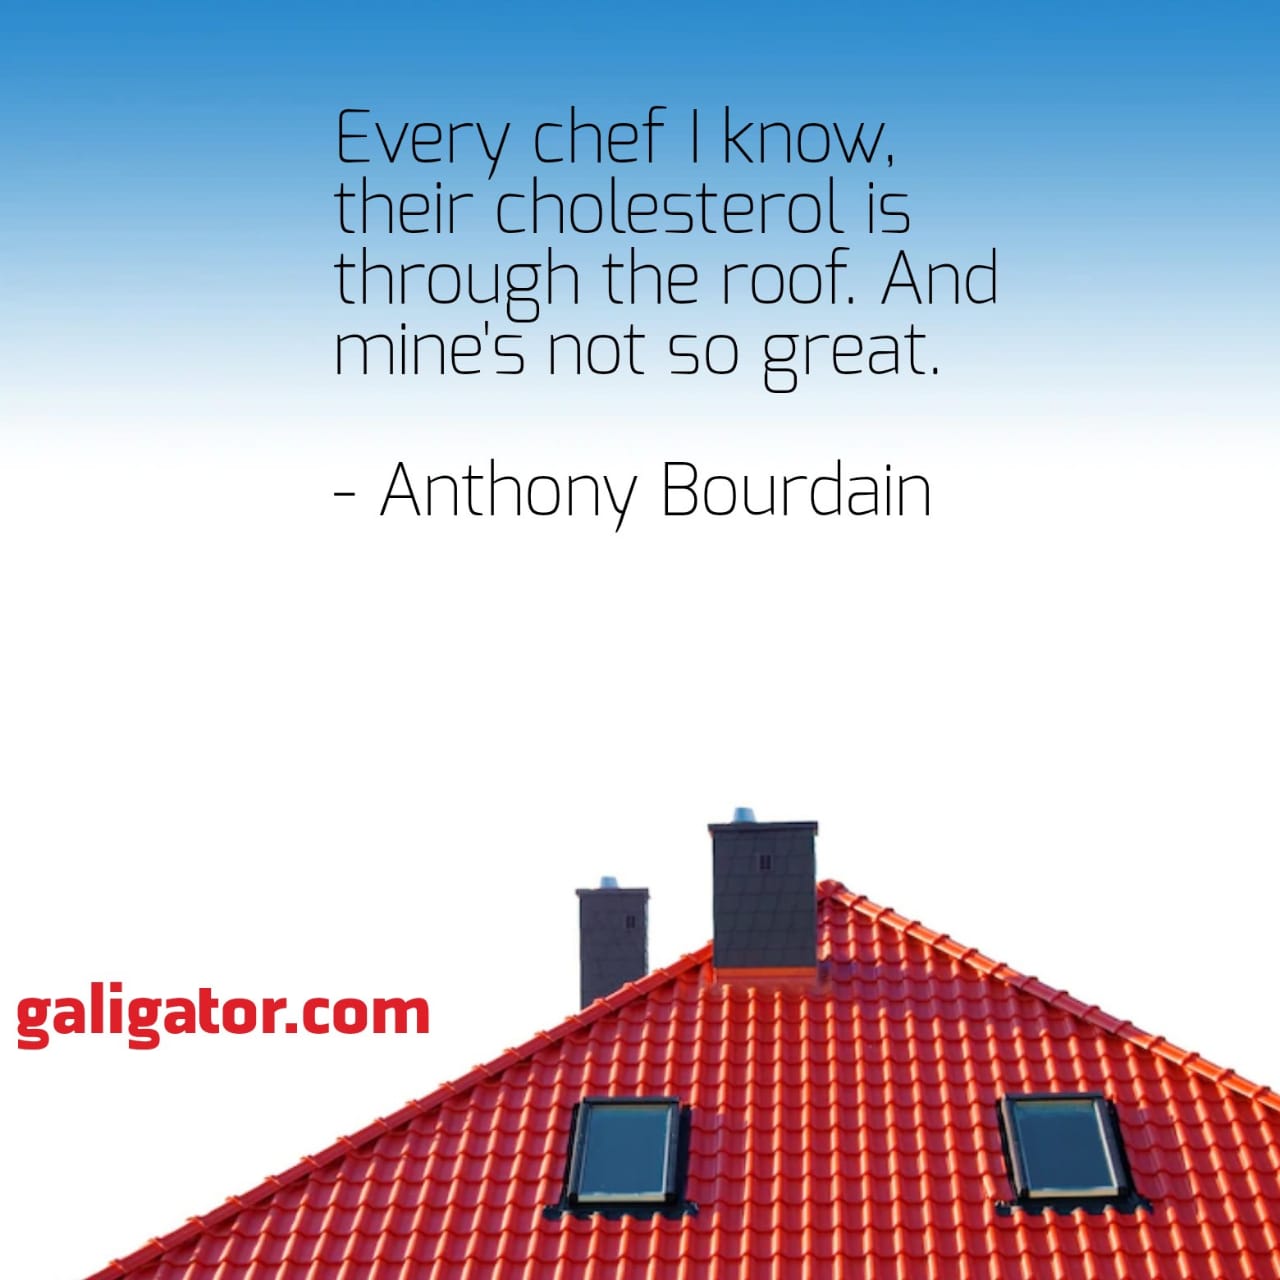 roofing quotes, quotes for roofing, roof quotes, quote for roof, quote roof , house roof quotes, quote roofing, roofing quotes and sayings, roofing quotation, on the roof quotes, roof quote,  roof quote, roofing quote,  fiddler on the roof quotes, cat on a hot tin roof homosexuality quotes, roof quotes near me , roof quotes online , roofing quote template ,